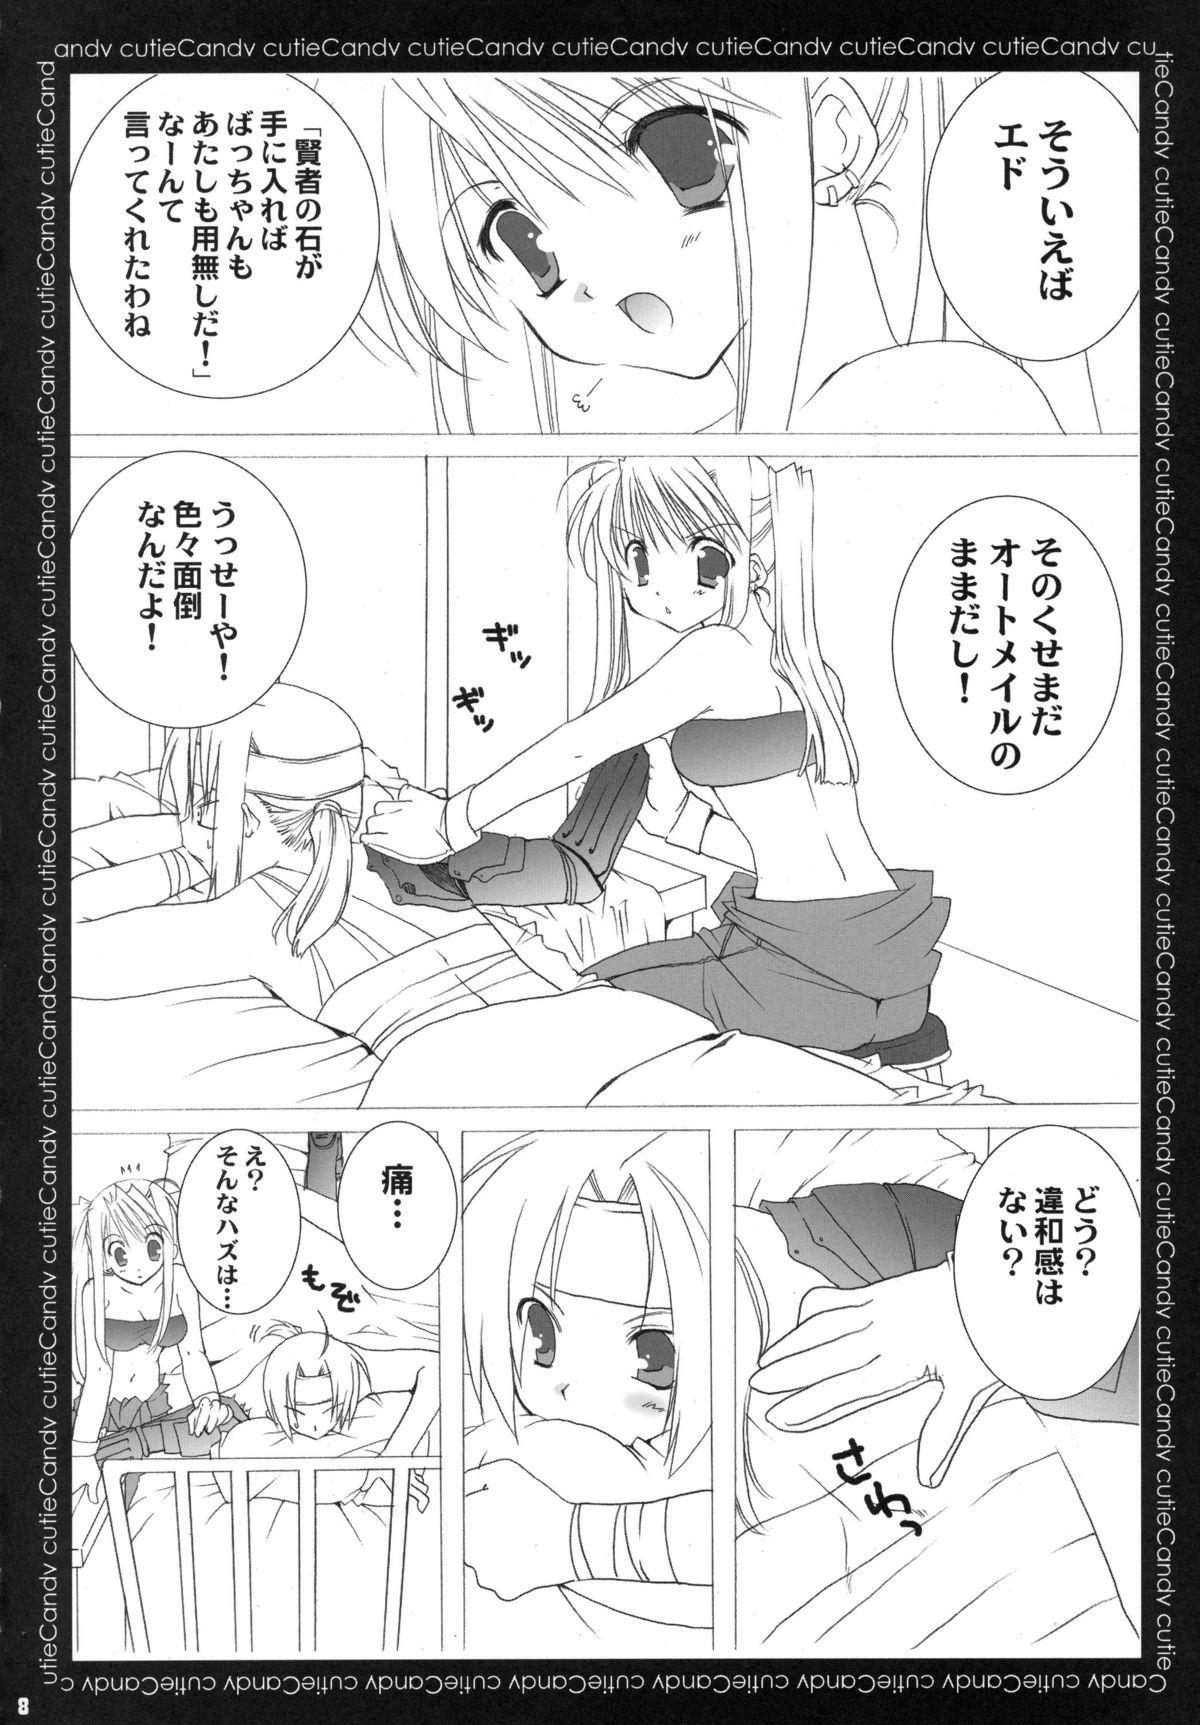 Best Blow Job Candy Cutie - Fullmetal alchemist Gay Theresome - Page 7